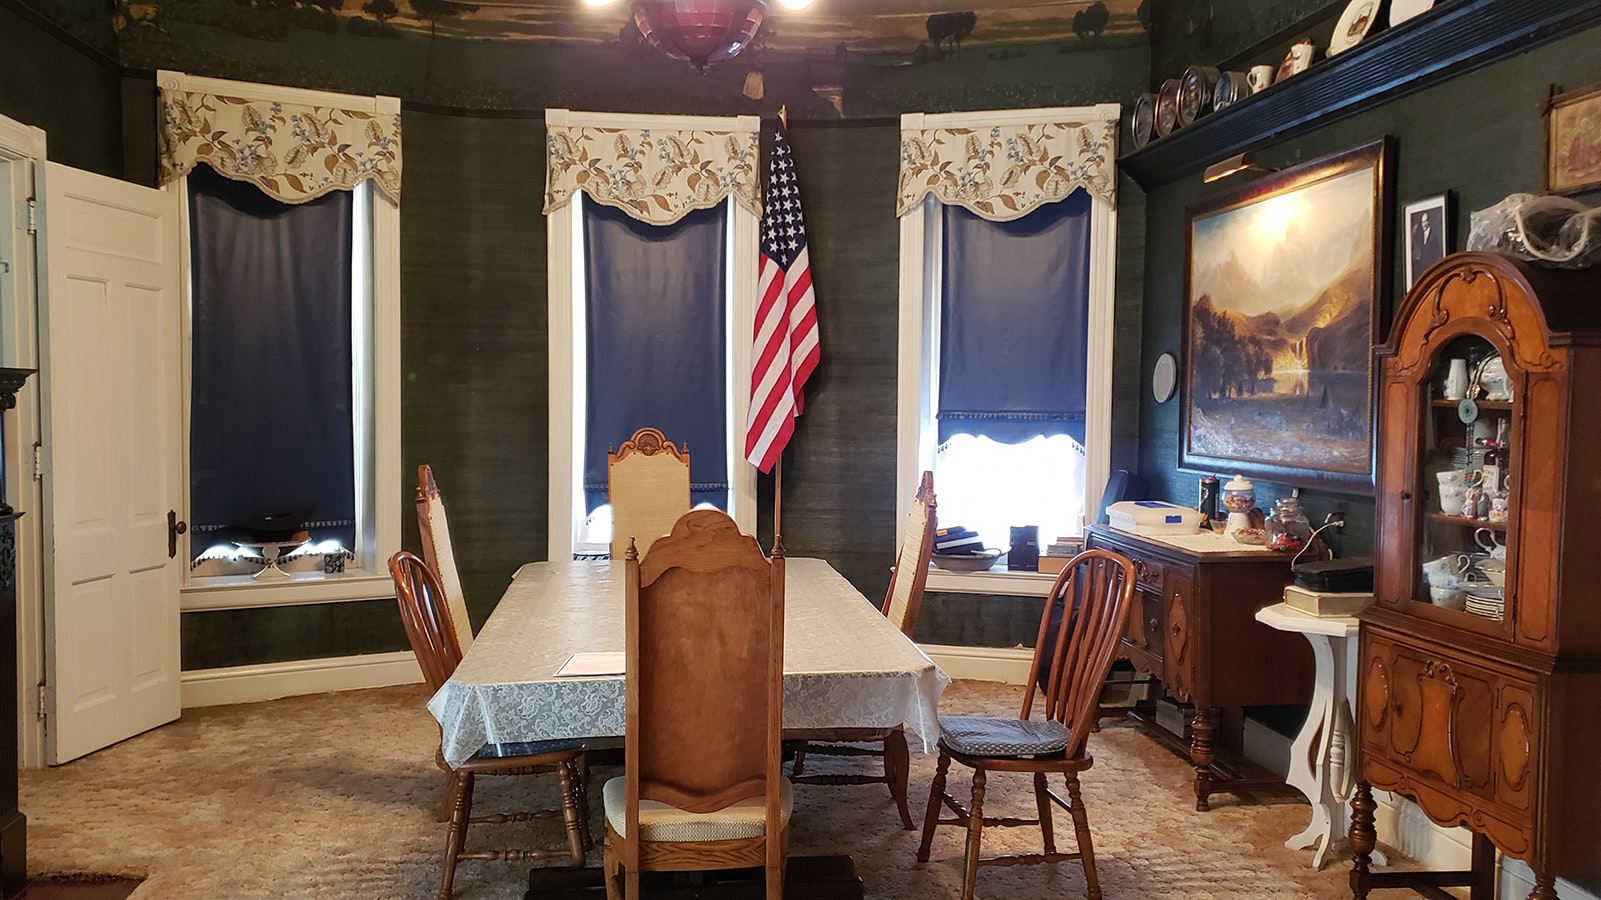 The dining room.